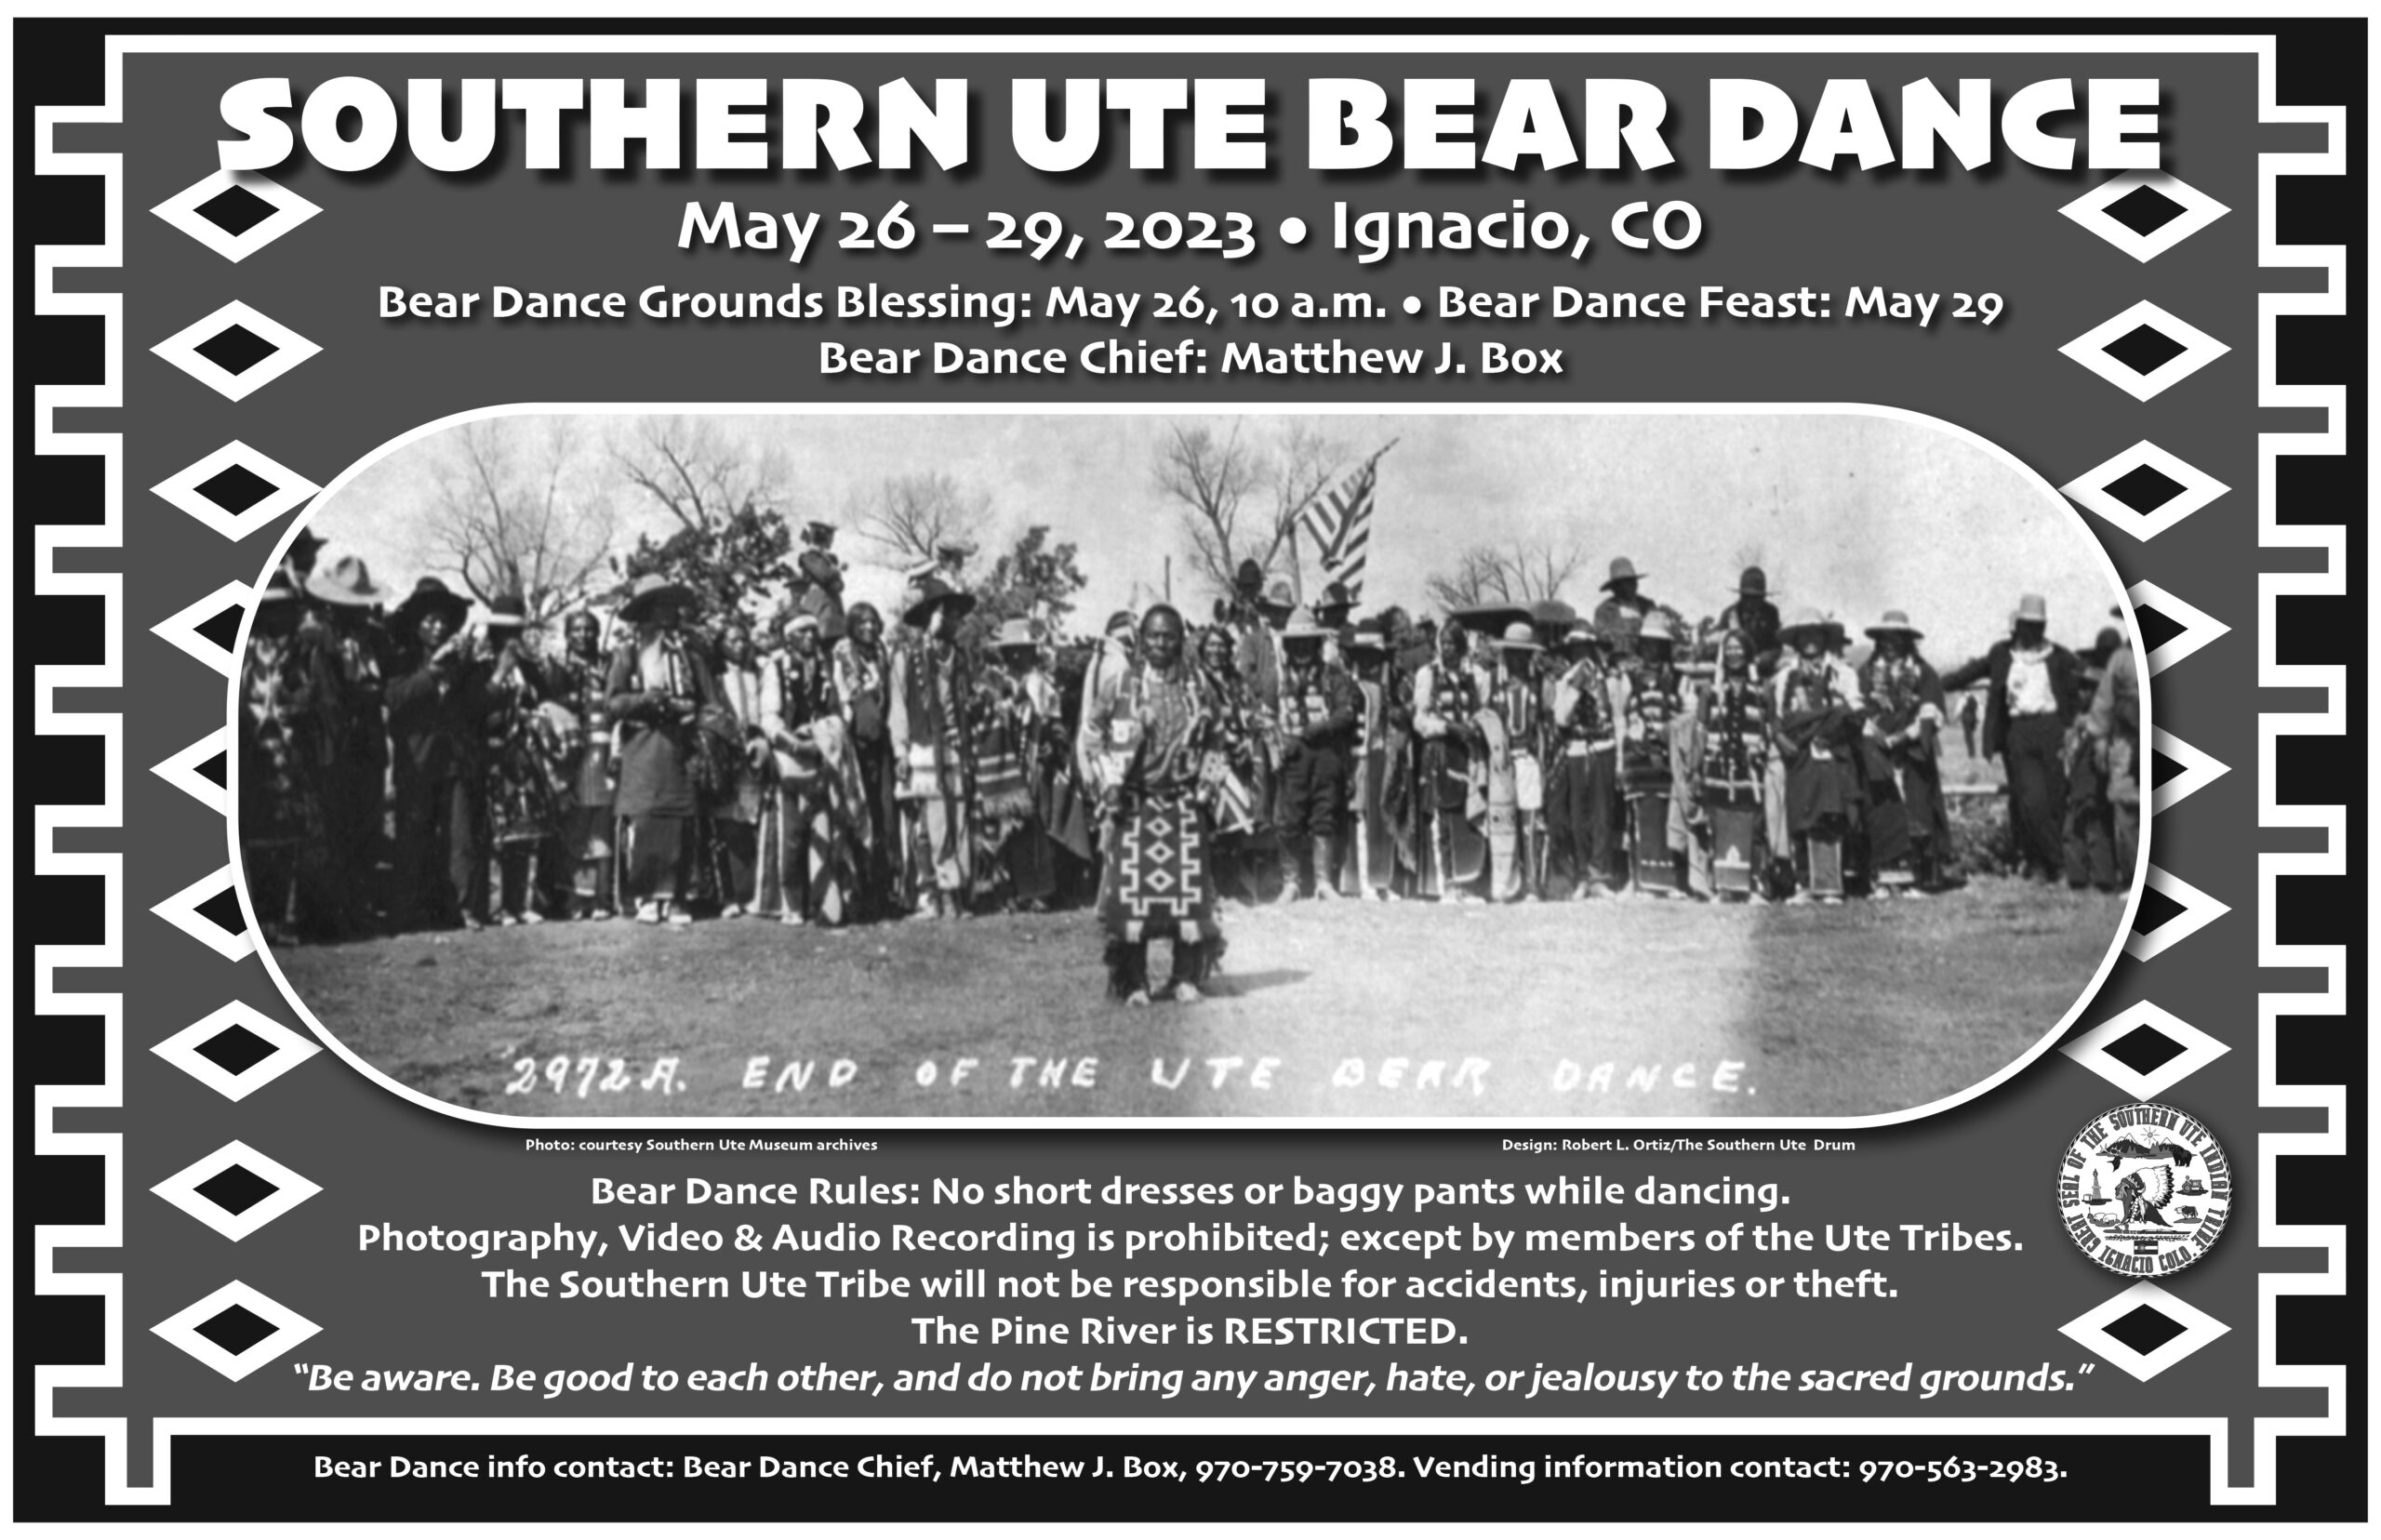 The Southern Ute Drum 2023 Southern Ute Bear Dance